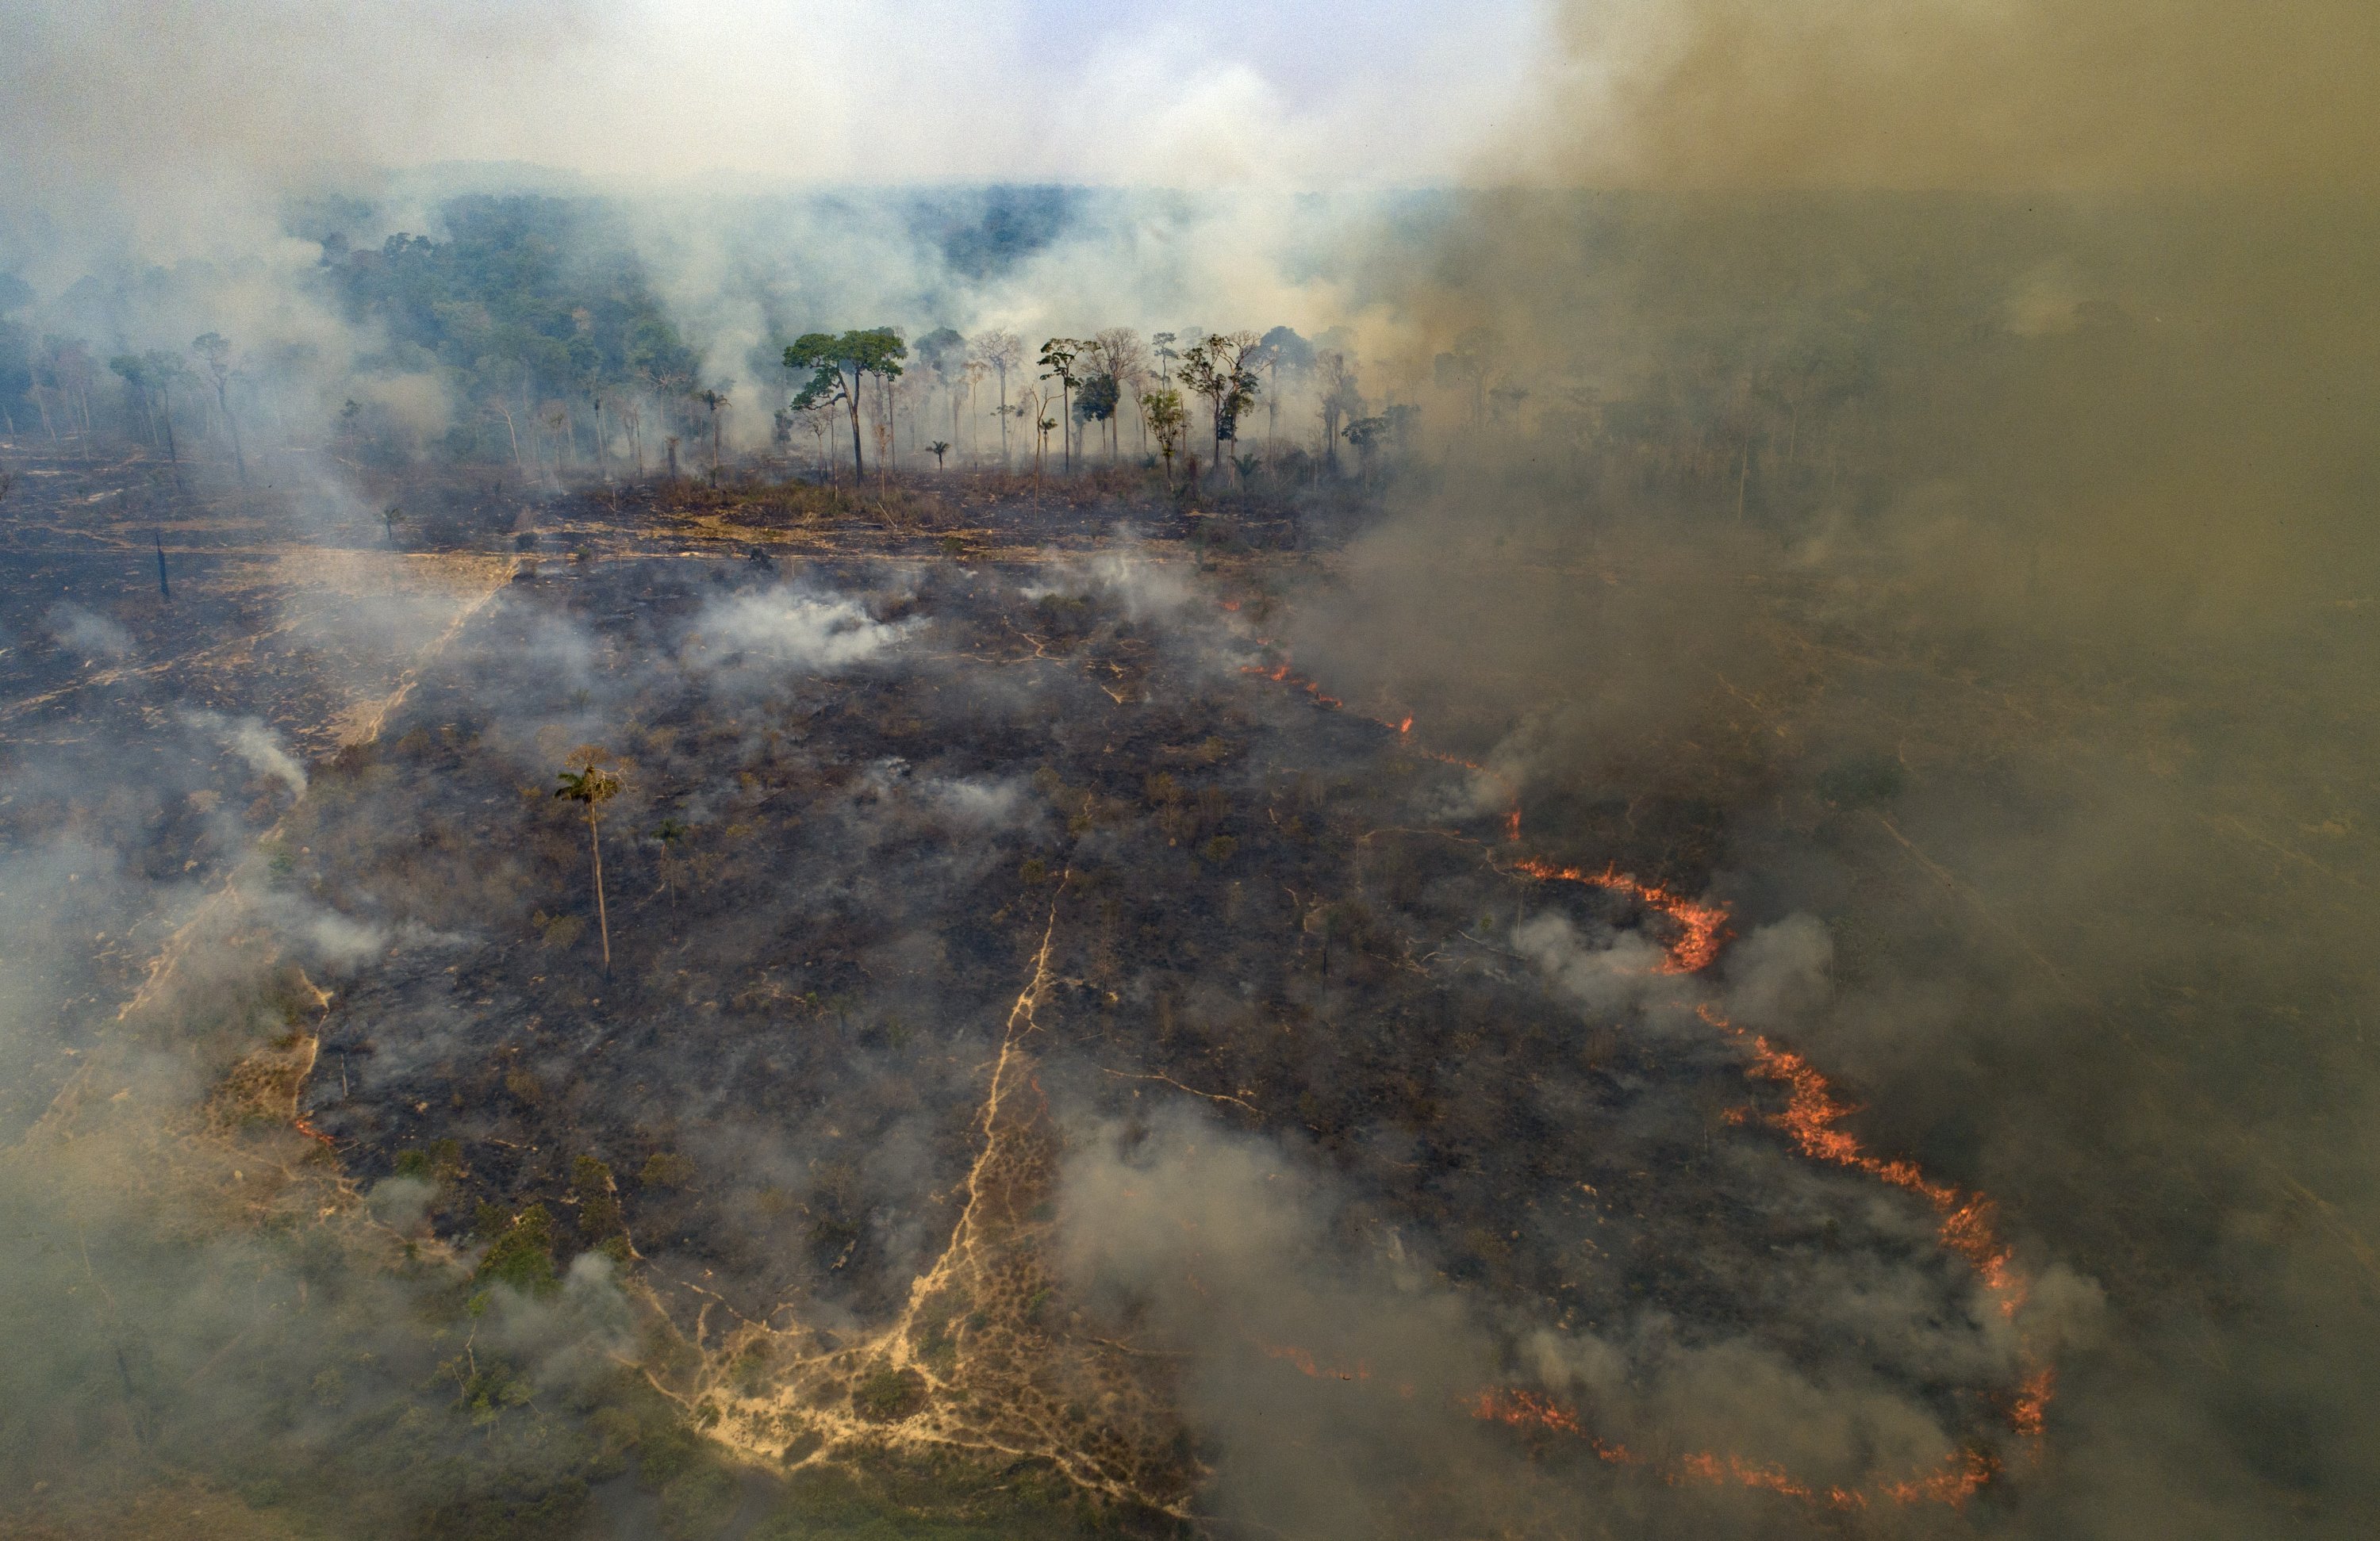 Fire consumes land recently deforested by cattle farmers near Novo Progresso, Para state, Brazil, Sunday, Aug. 23, 2020. Environmentalists say that the Amazon has lost about 17% of its original area and, fear at the current it could reach a tipping point in the next 15 to 30 years after which it could cease to generate enough rainfall to sustain itself. (AP Photo/Andre Penner)